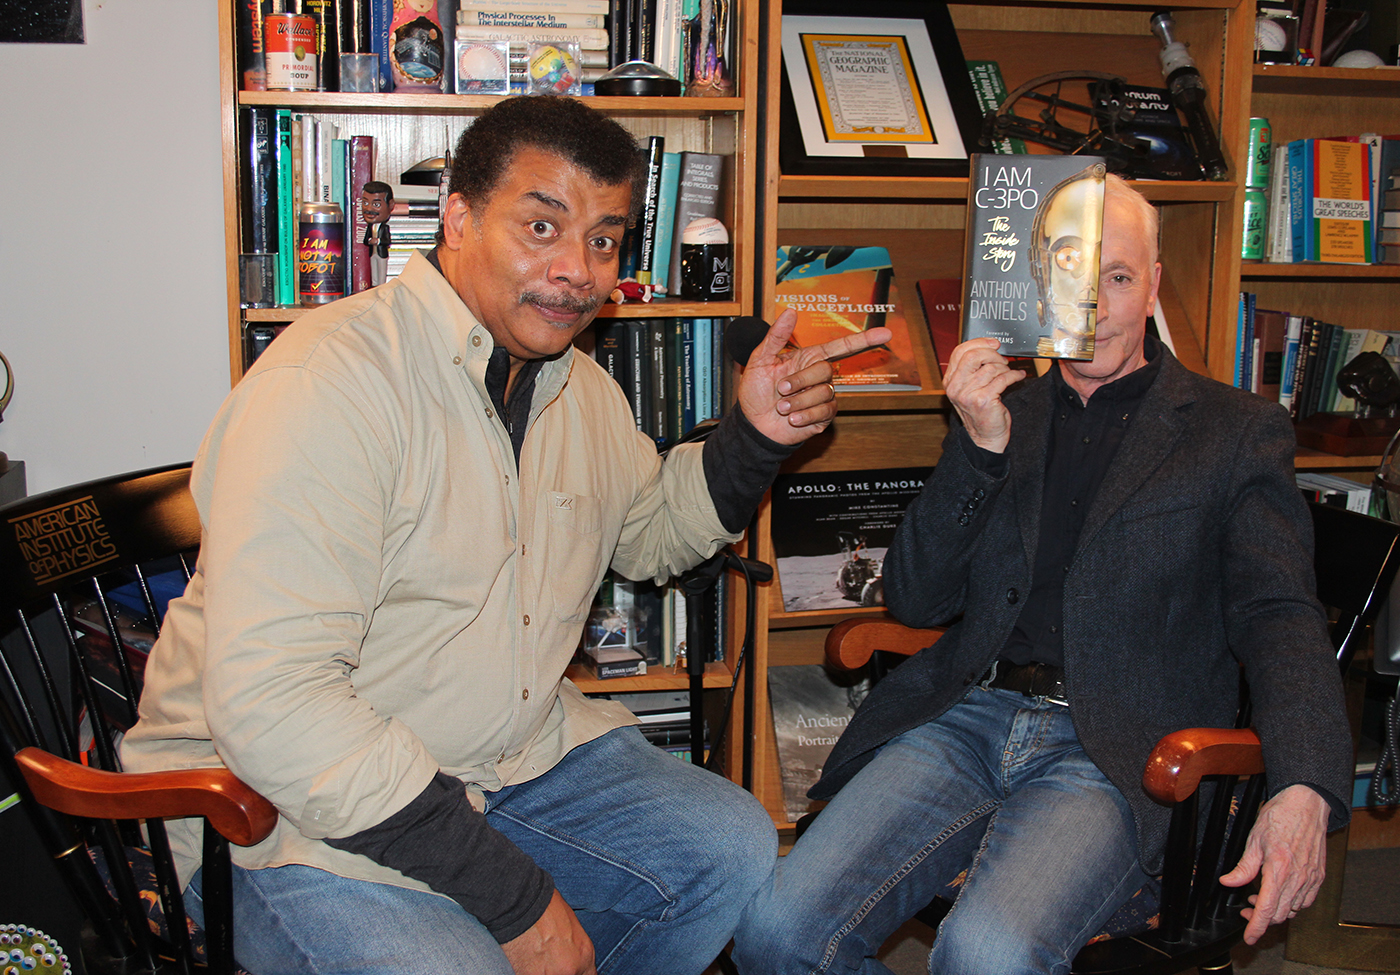 StarTalk’s Photo of Neil deGrasse Tyson and Anthony Daniels, Star Wars actor and author of “I Am C-3PO.” 